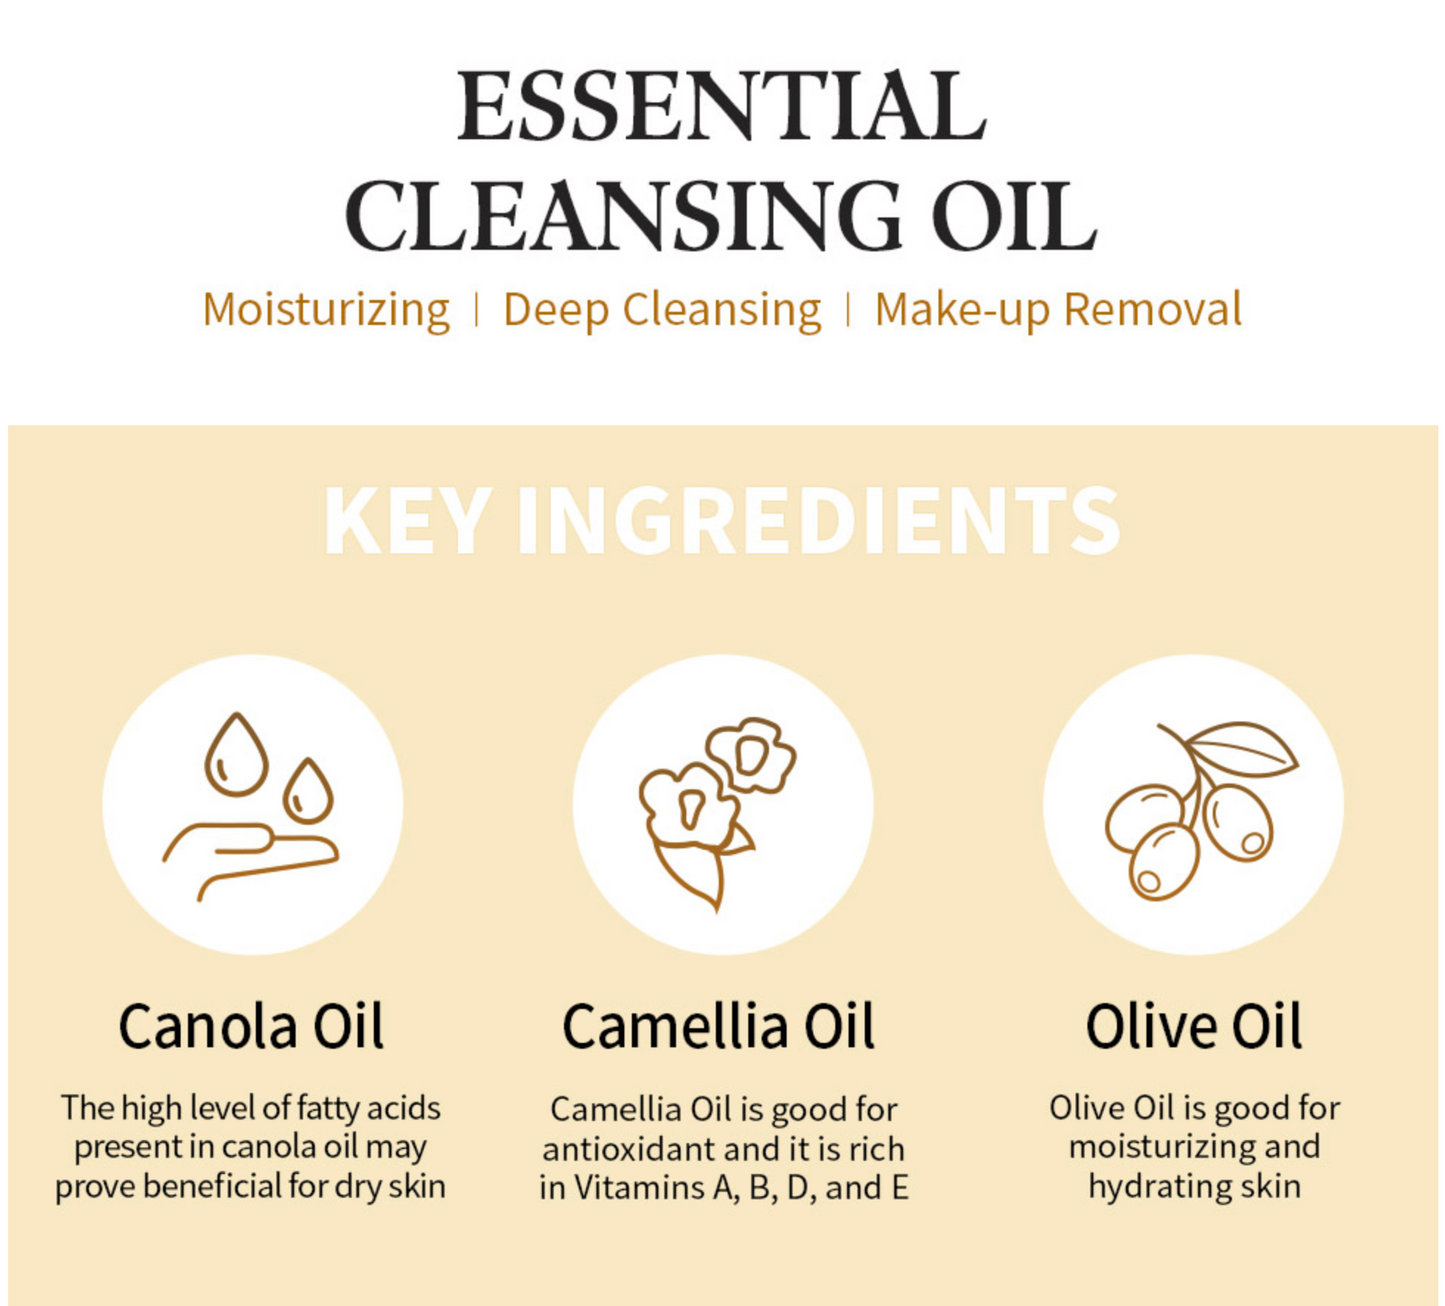 Essential Cleansing Oil - Purifying and Cleansing